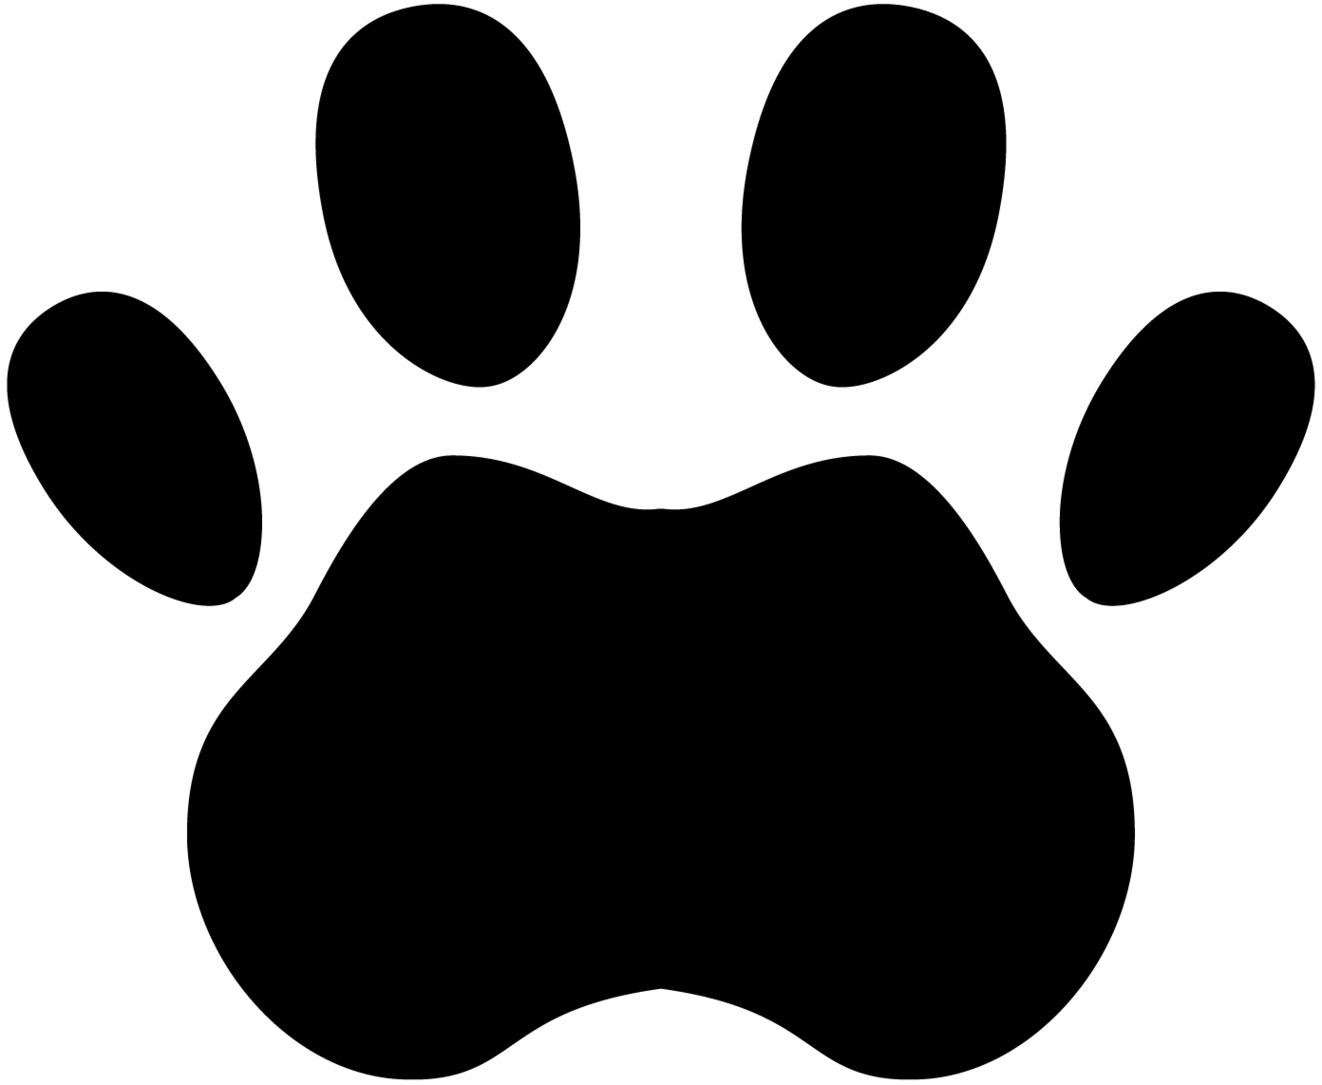 Paw prints tigers paw print clipart free to use clip art.